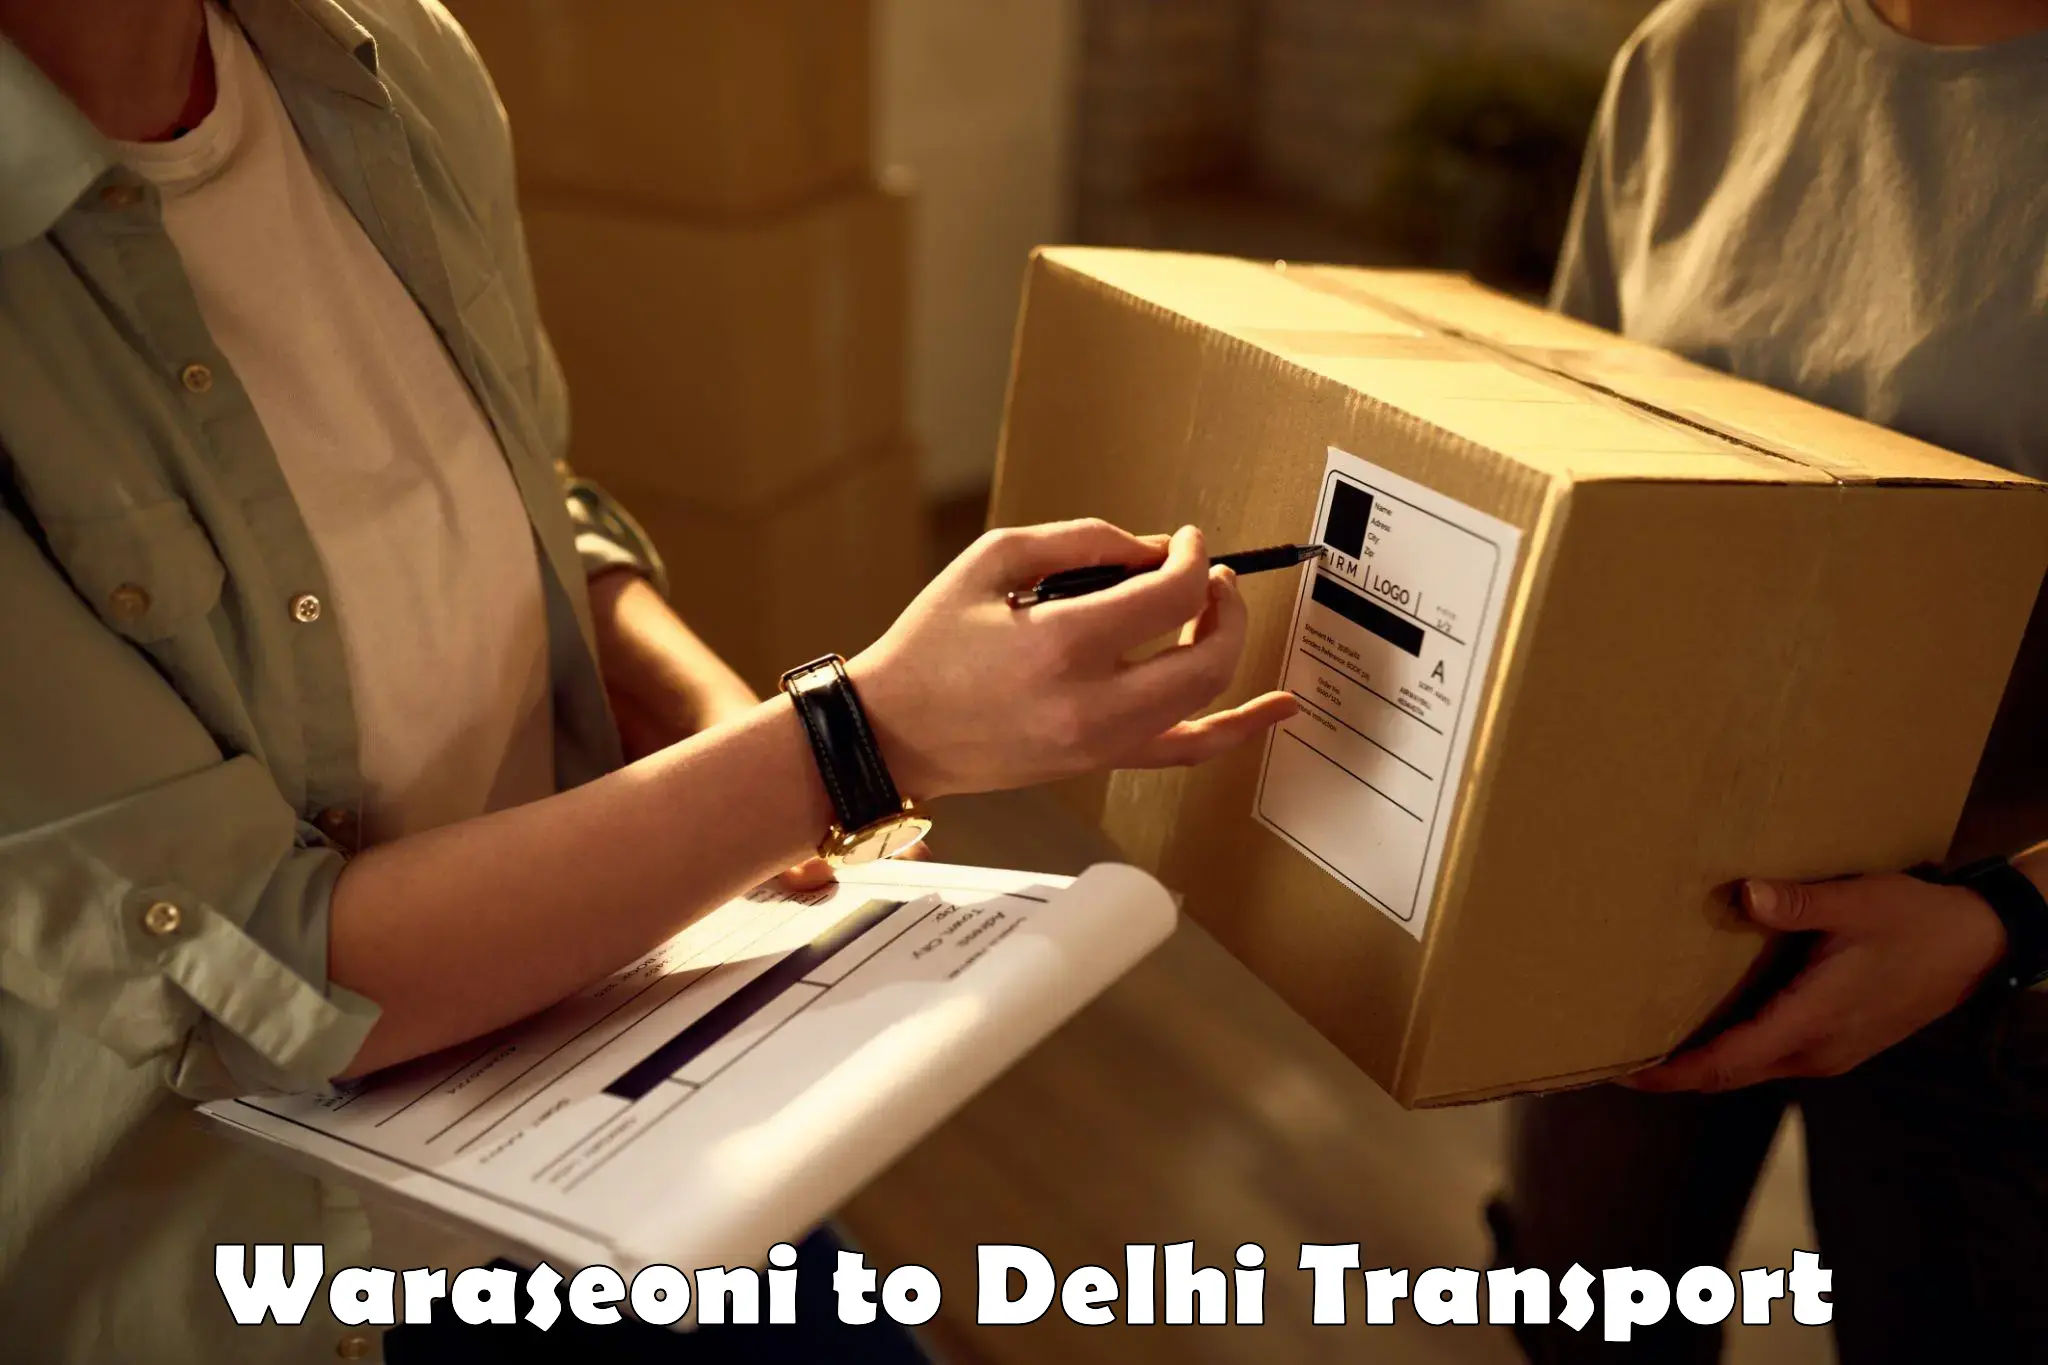 Commercial transport service Waraseoni to East Delhi